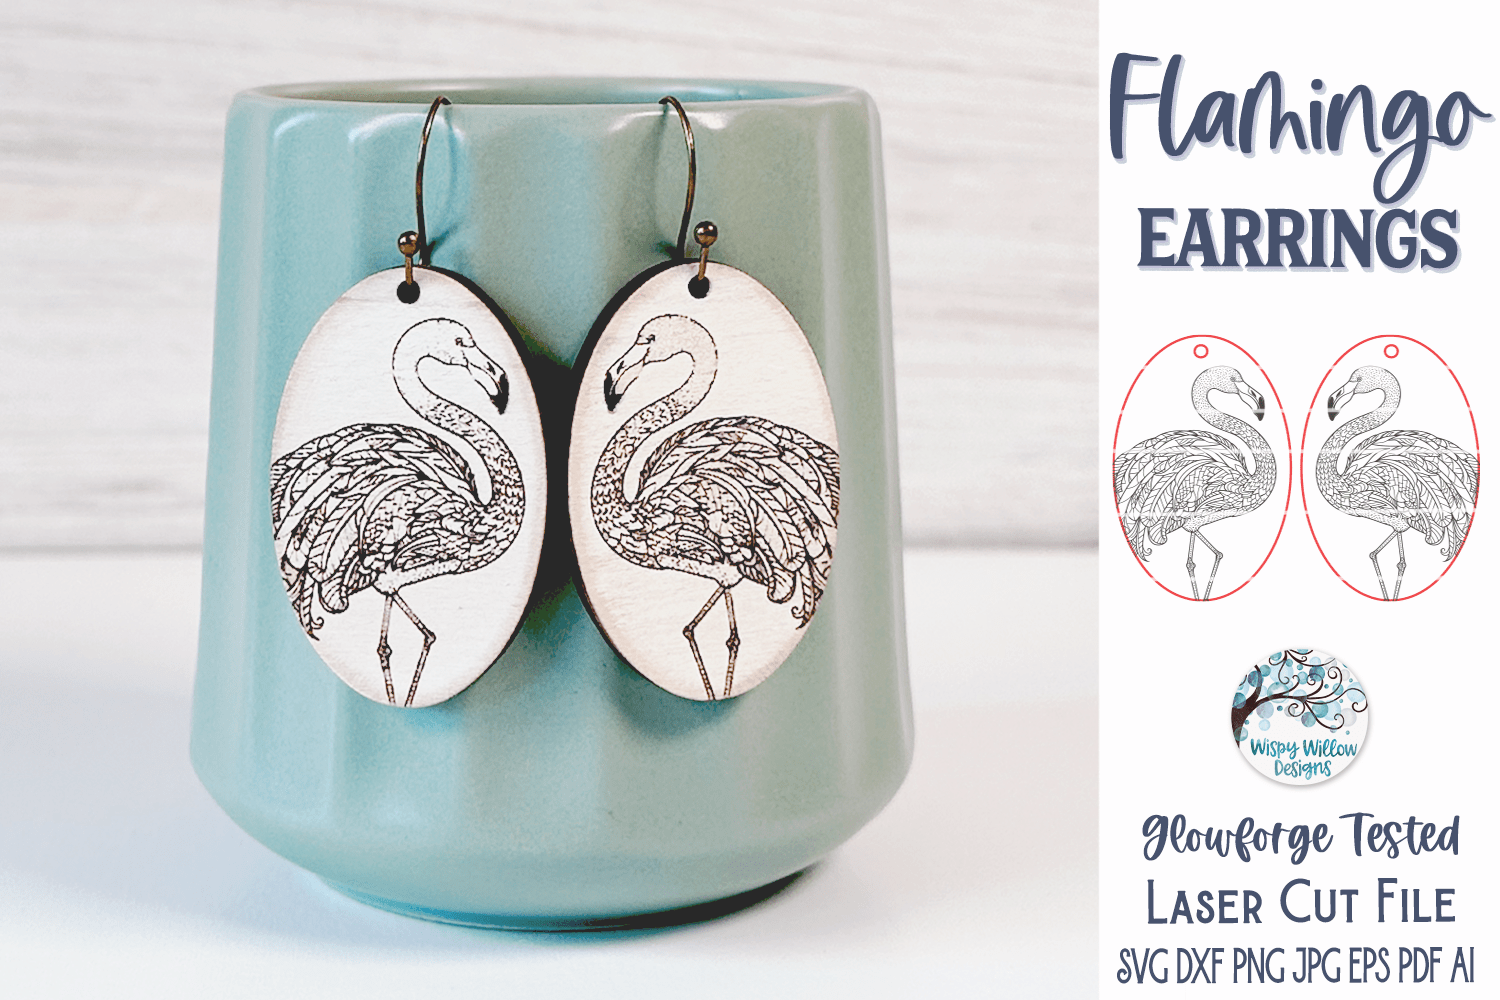 Flamingo Earring SVG File for Glowforge or Laser Cutter Wispy Willow Designs Company